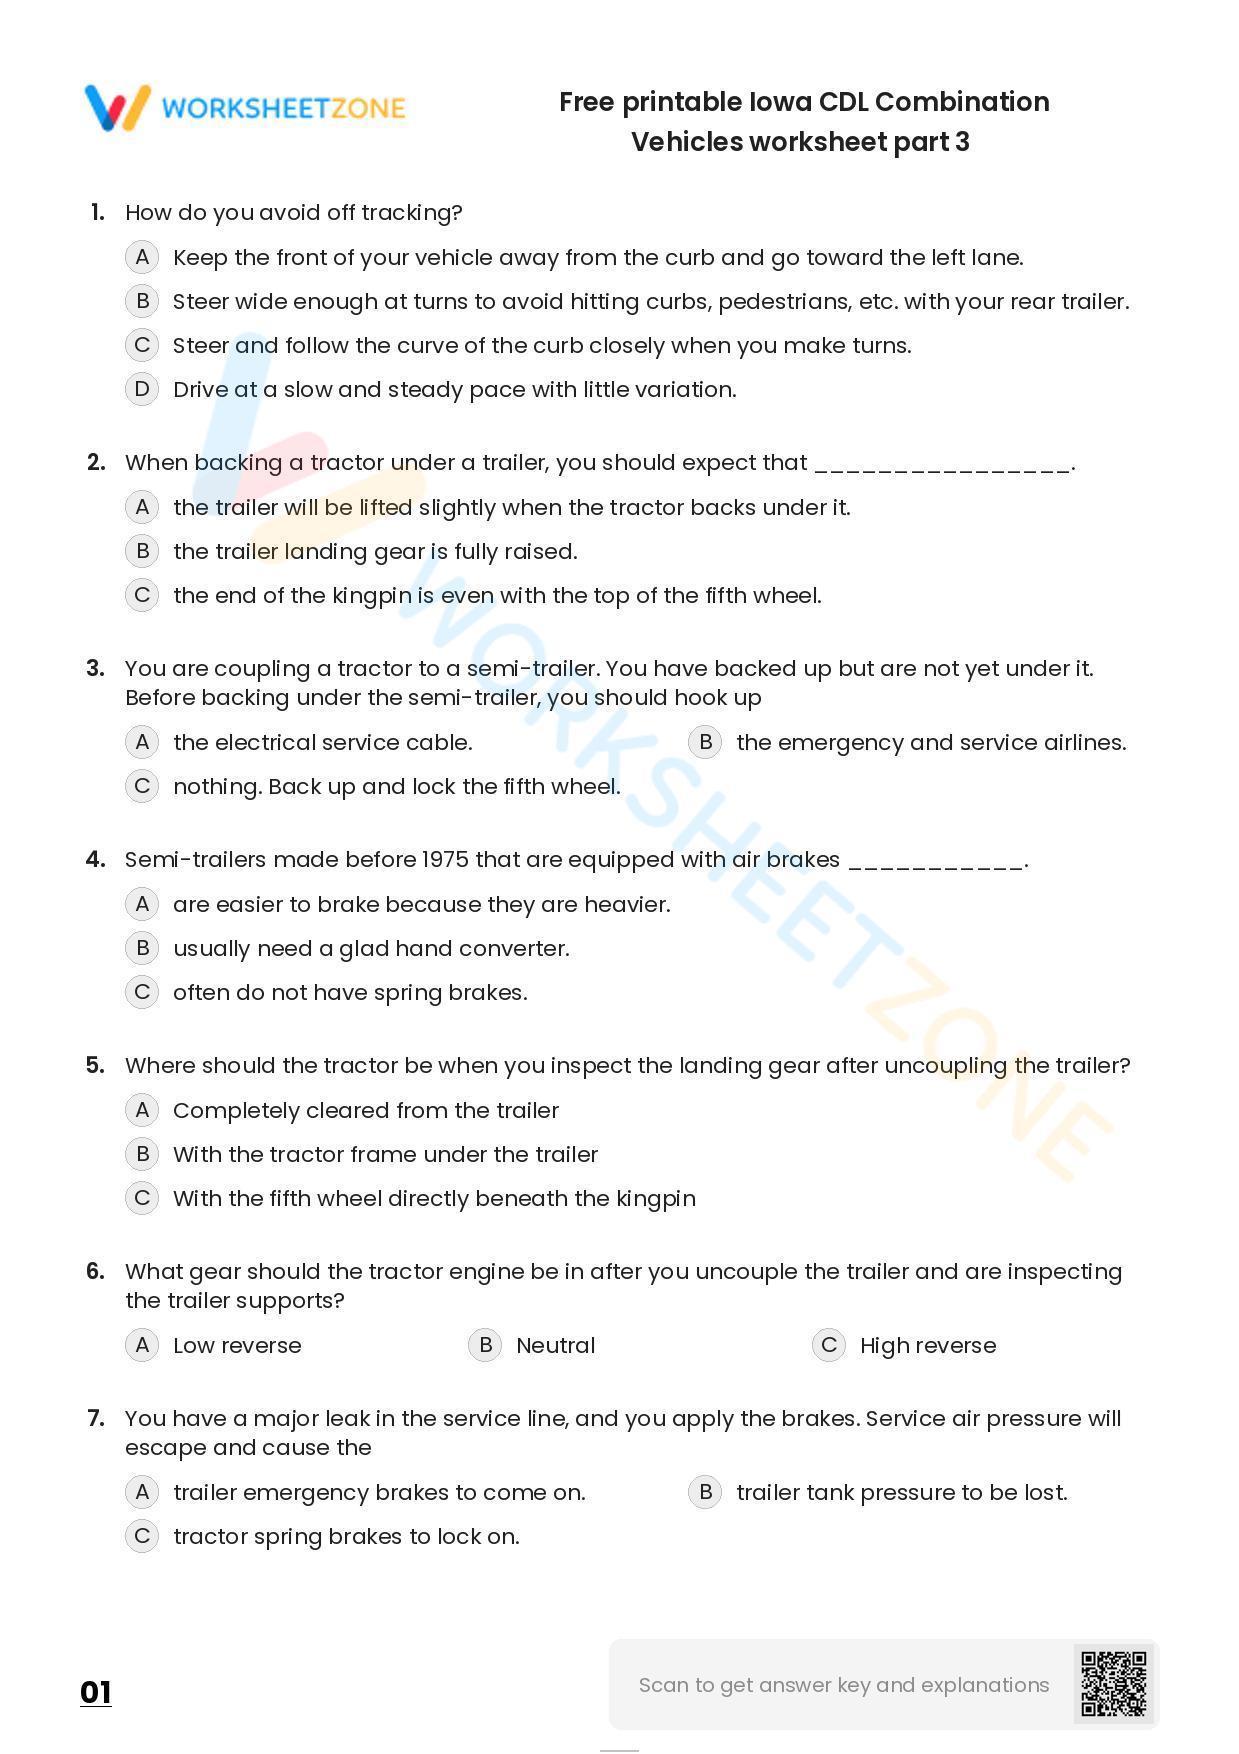 Free Printable Iowa CDL Combination Vehicles Practice Test Worksheet Zone